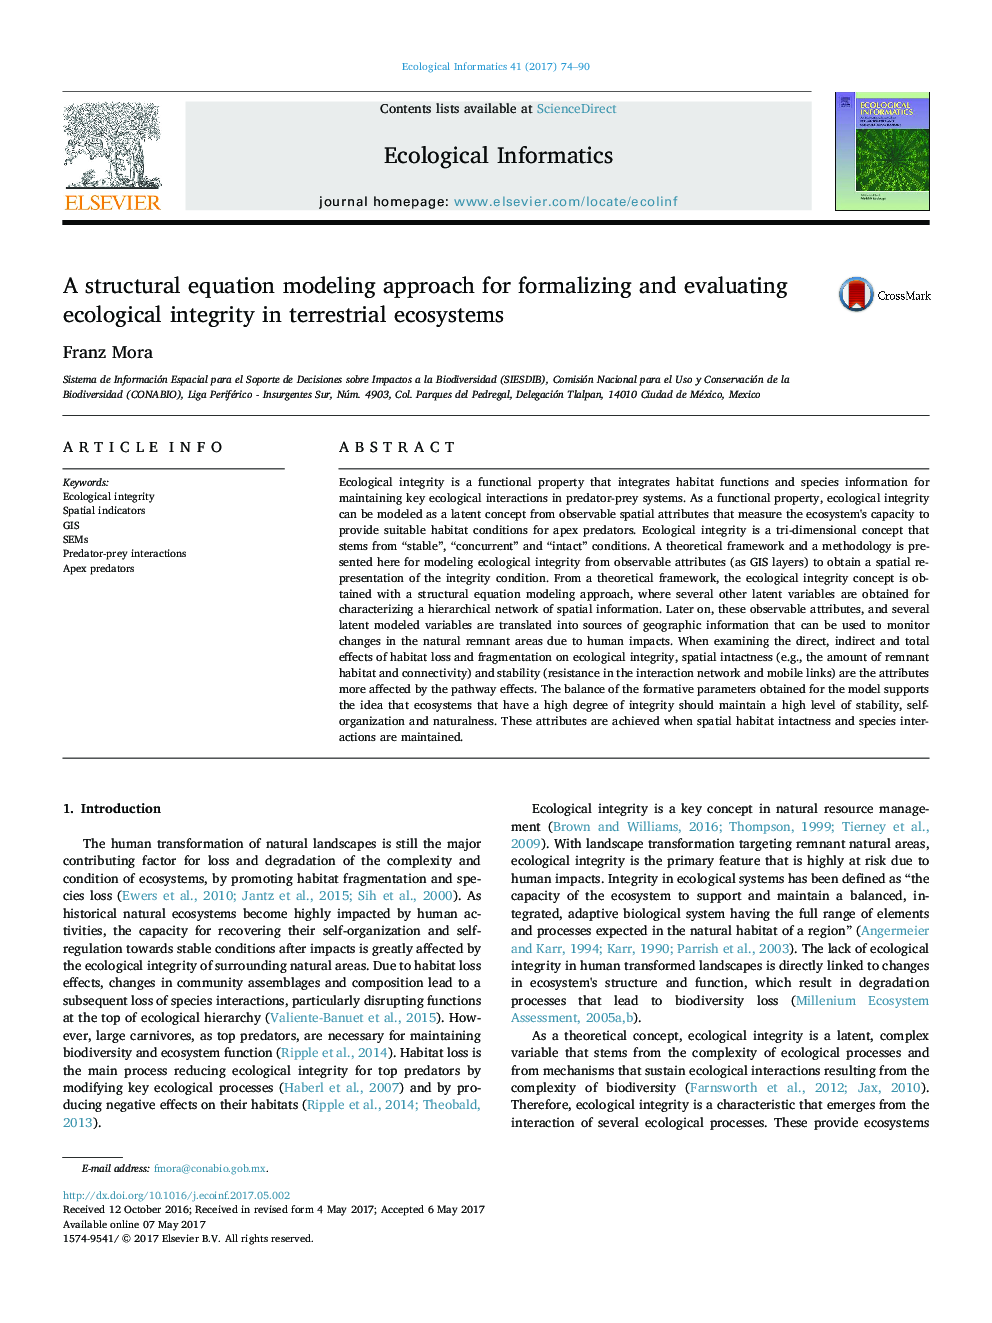 A structural equation modeling approach for formalizing and evaluating ecological integrity in terrestrial ecosystems